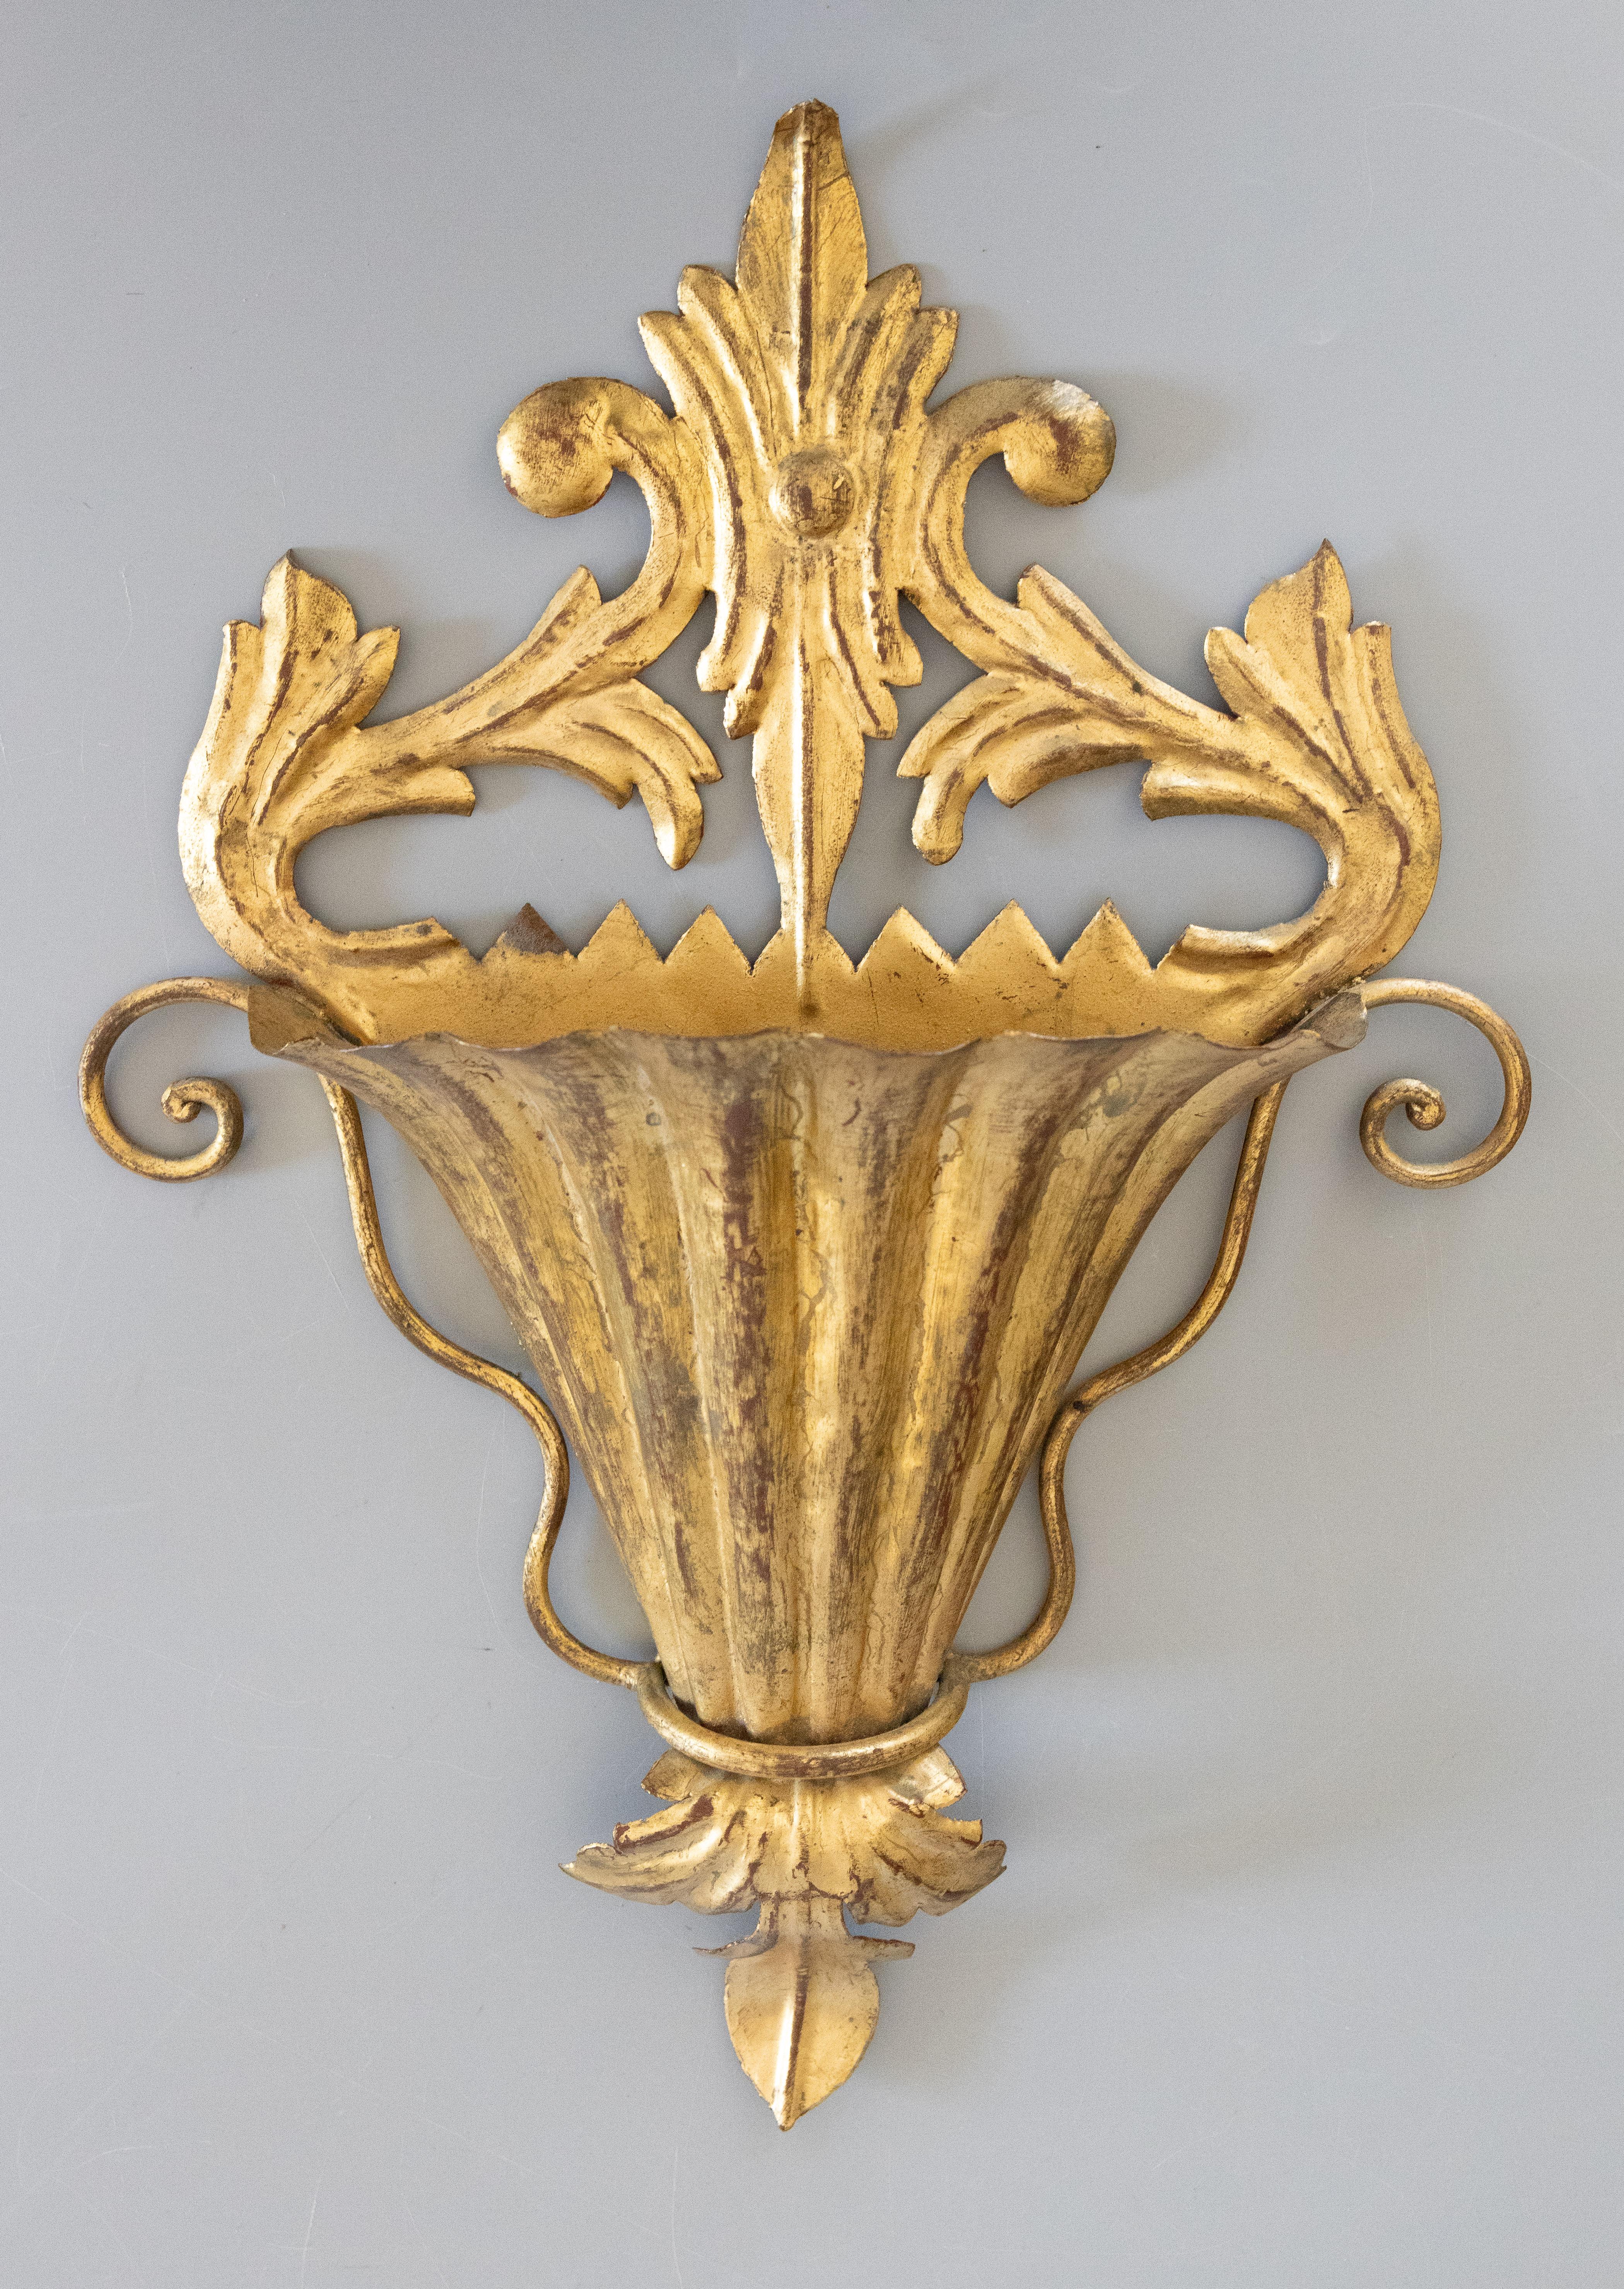 A lovely vintage Italian gilt tole wall pocket planter by Palladio, circa 1950. Marked 